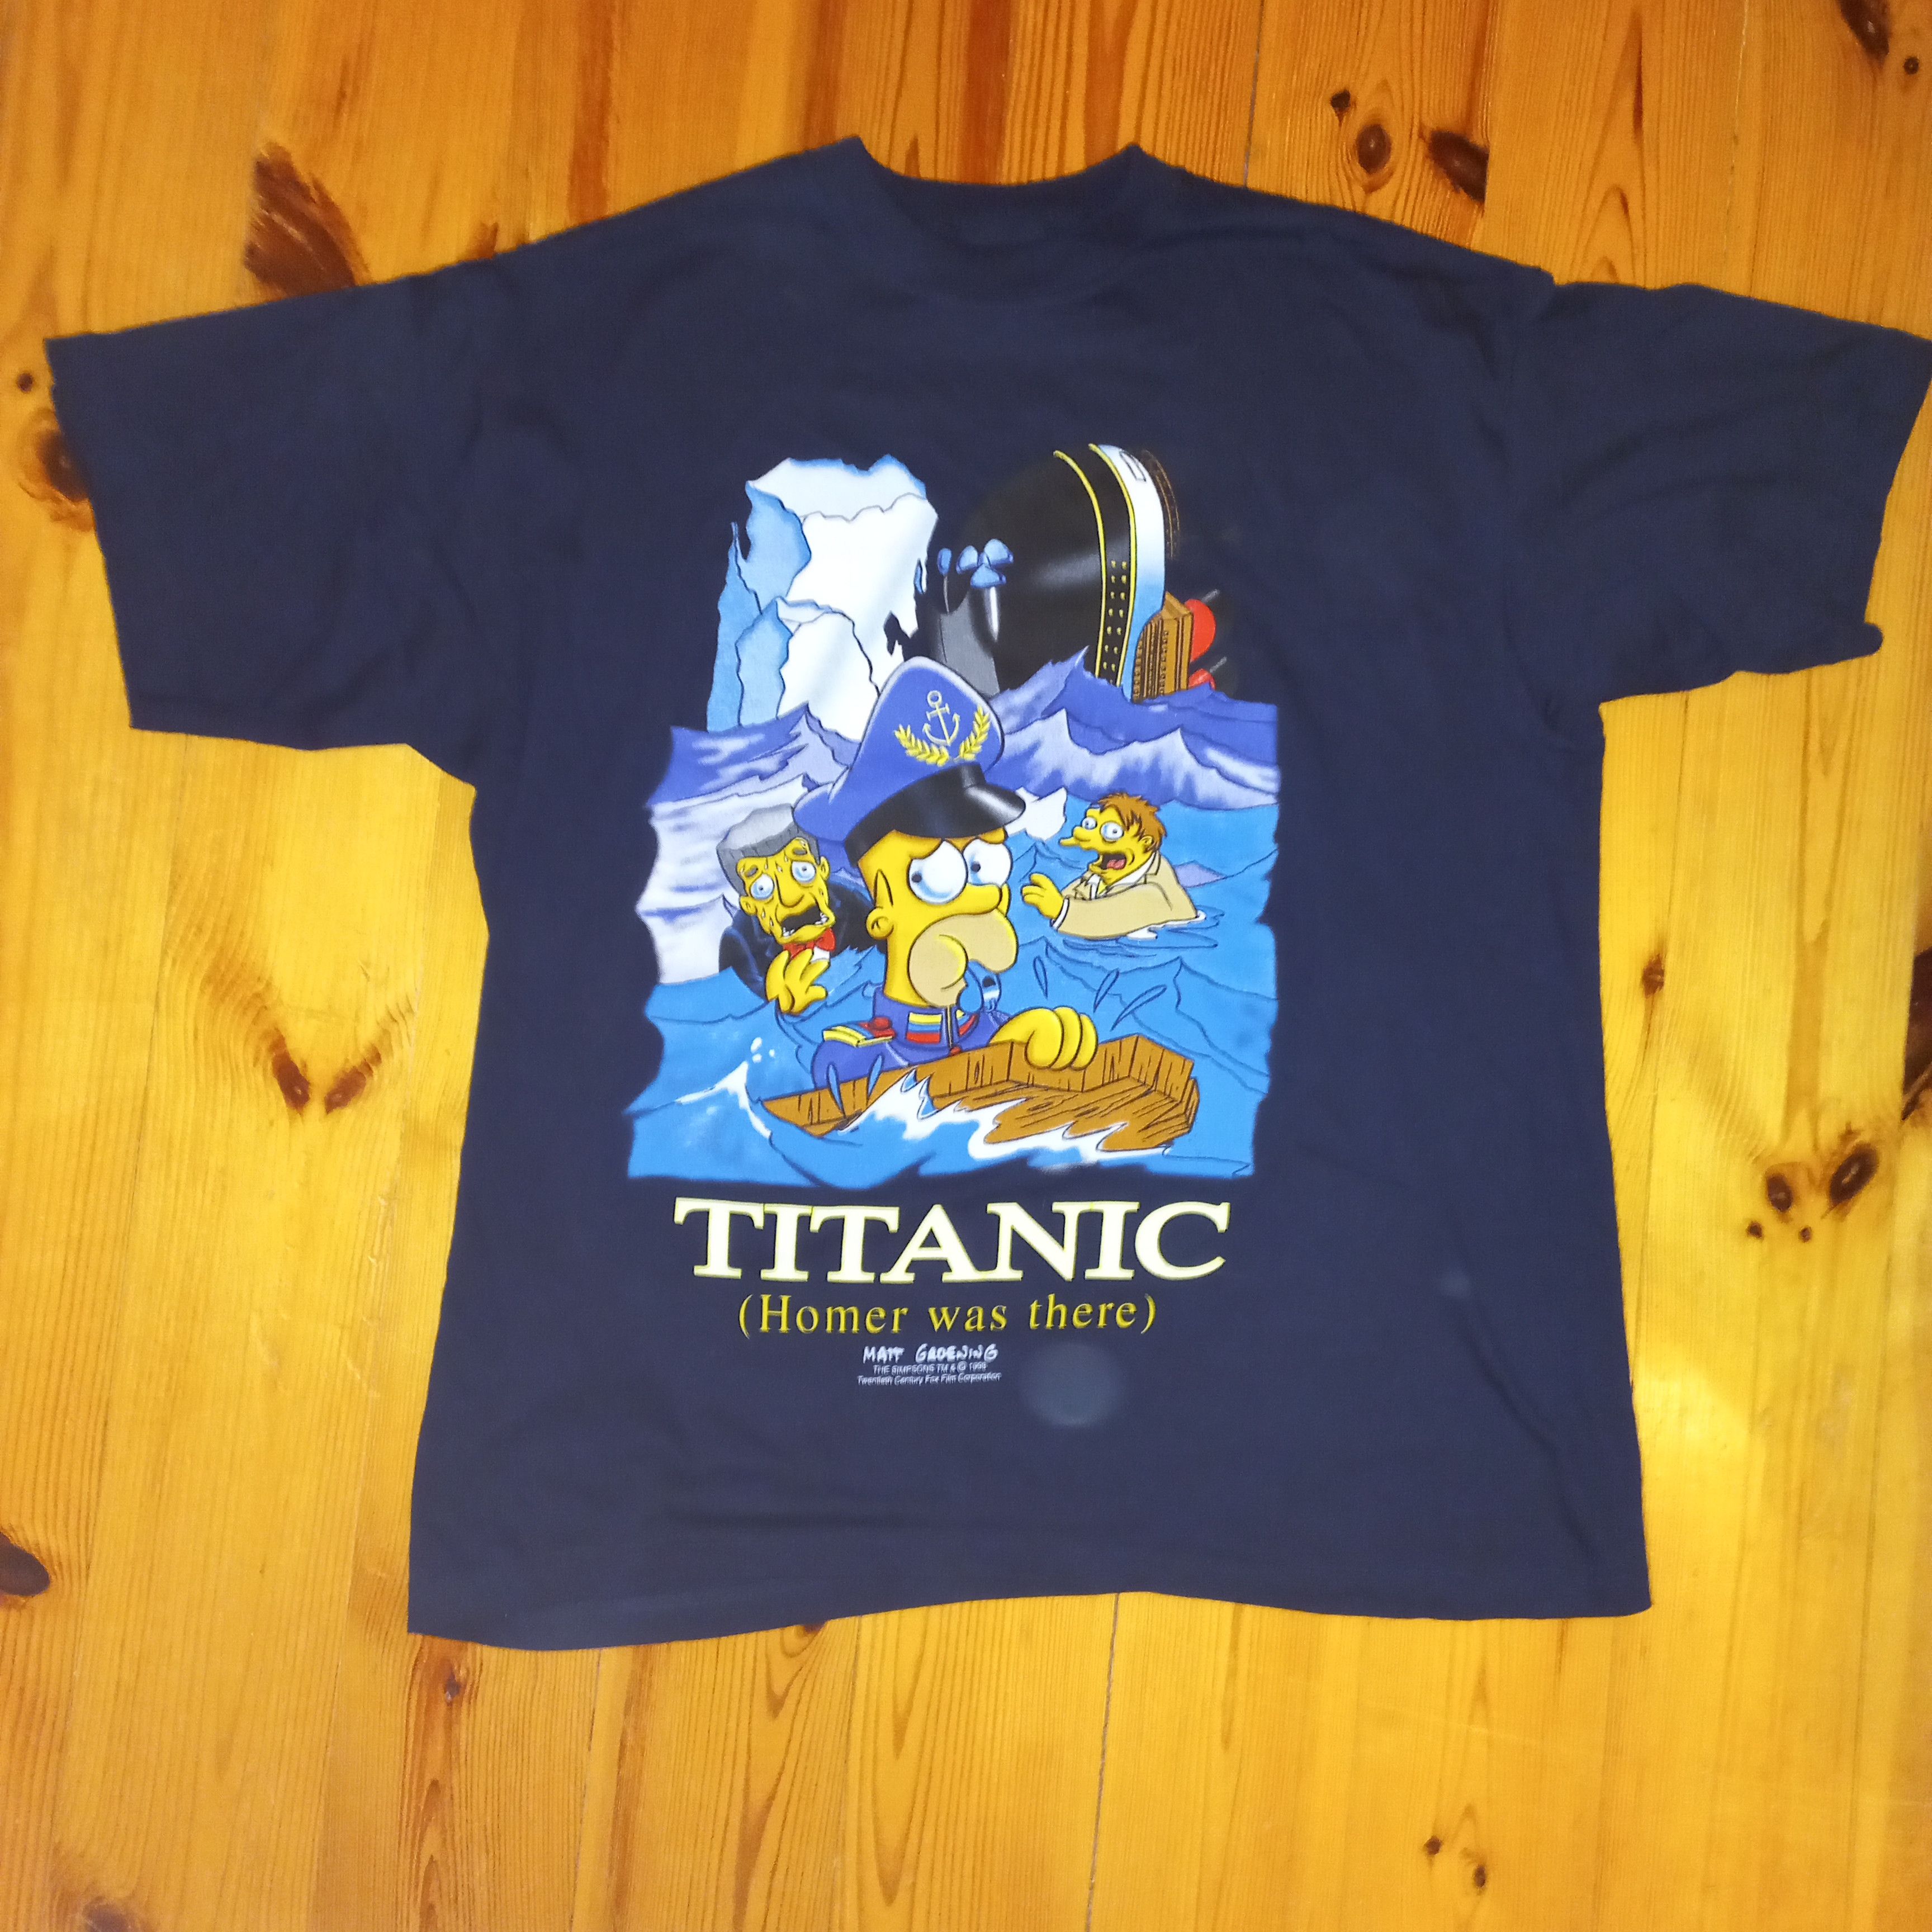 Rwd Redwood Vintage 1998 Titanic The Simpsons 'Homer Was There' Size US XL / EU 56 / 4 - 3 Thumbnail